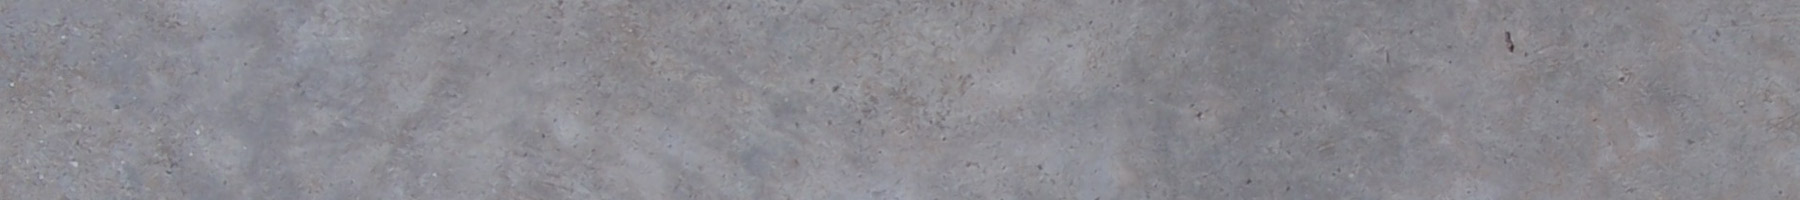 image of gray plaster texture